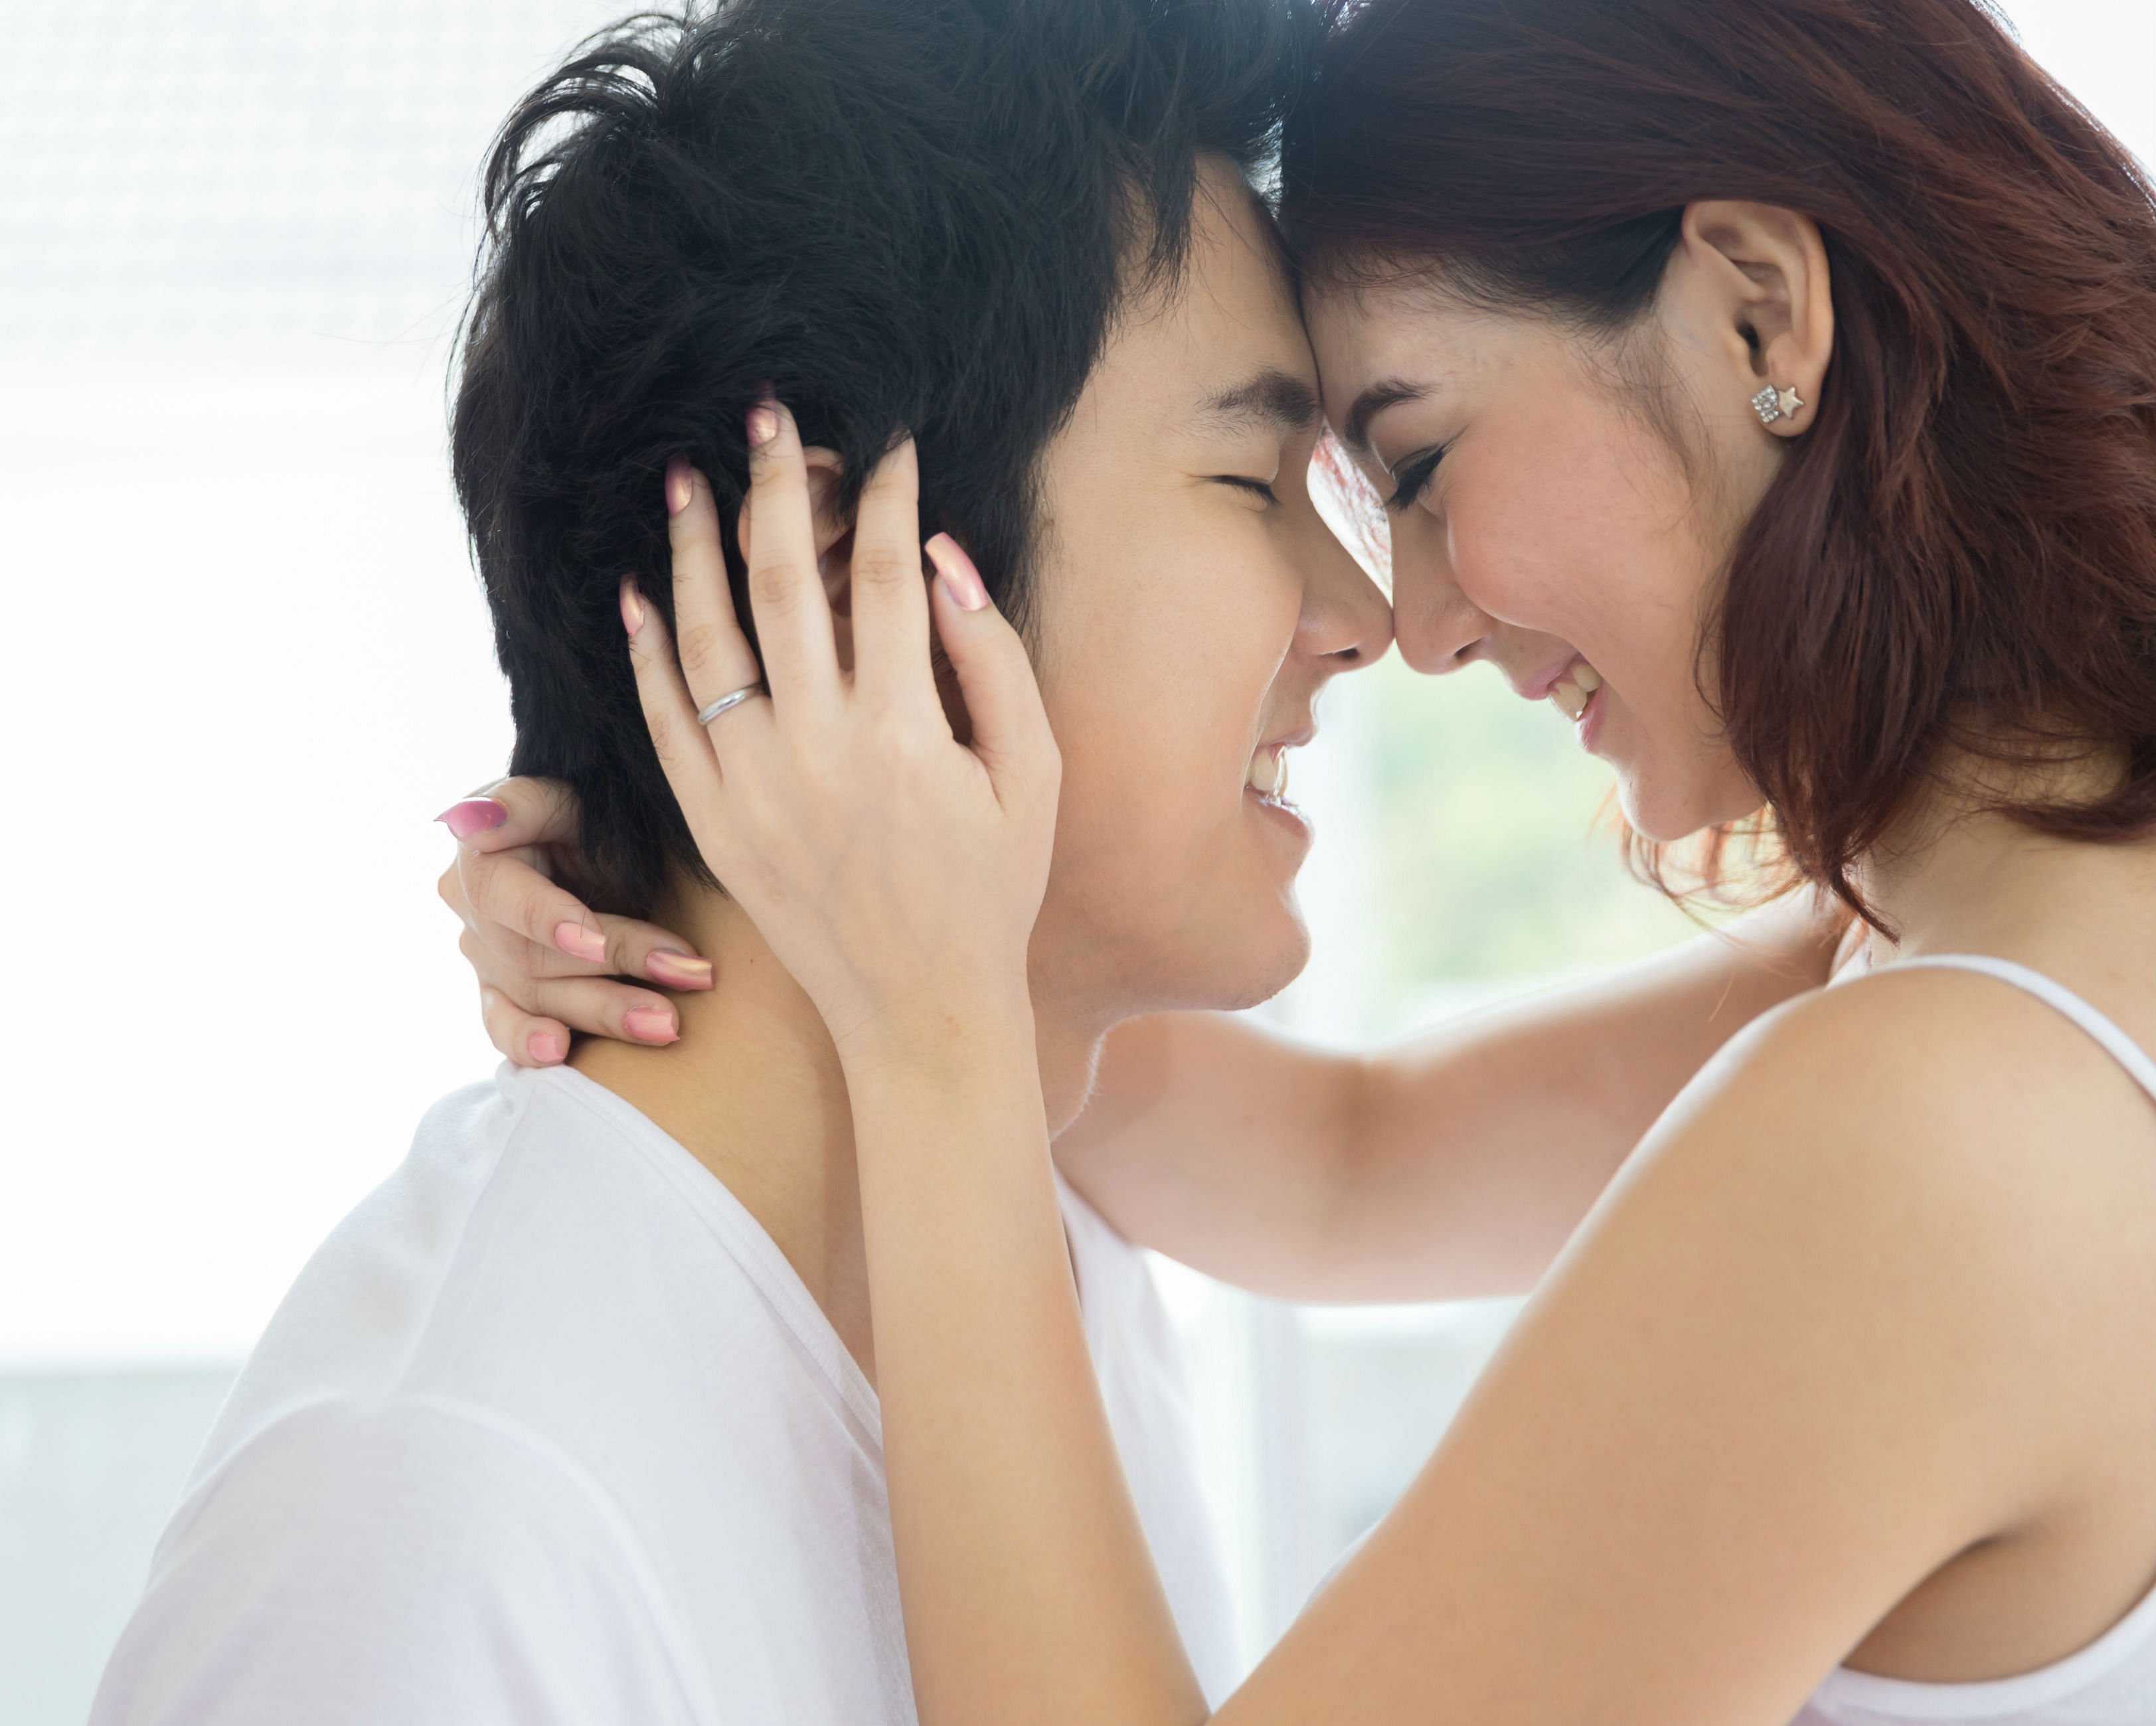 What to you do after sex in Singapore